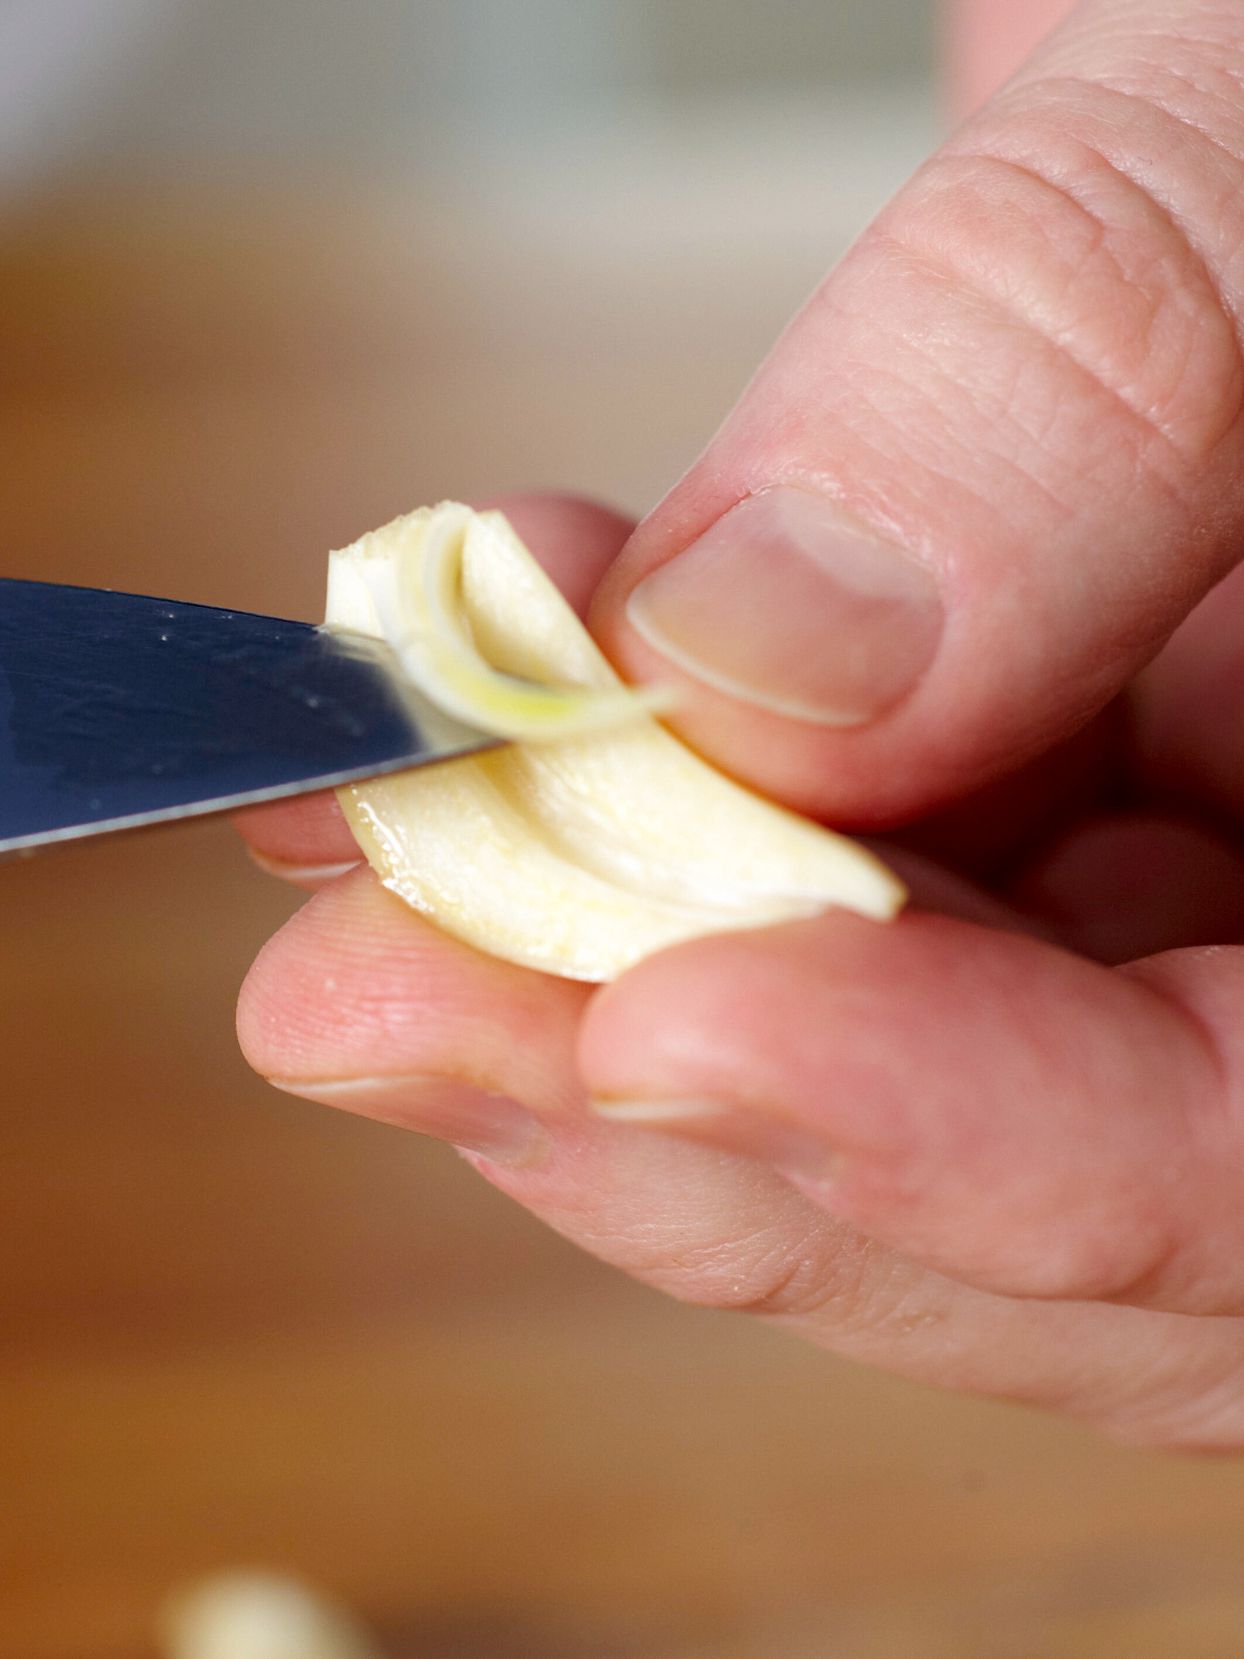 removing garlic sprout with knife